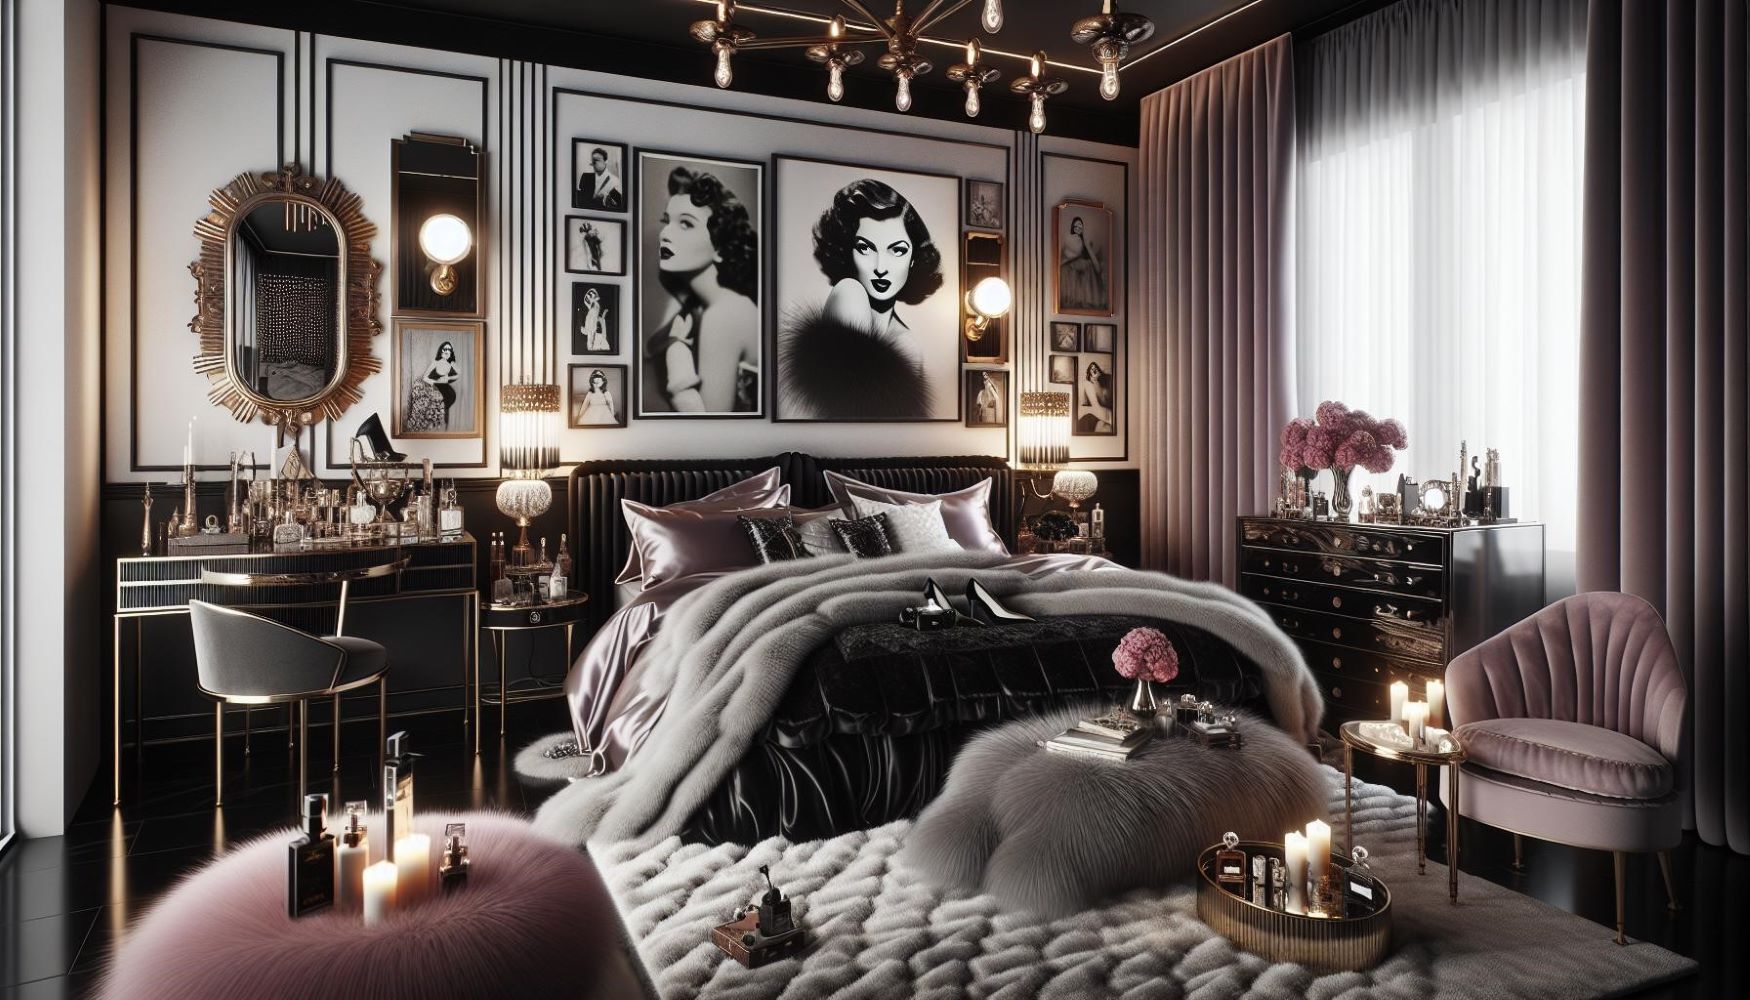 How to Create a Marilyn Monroe Themed Bedroom